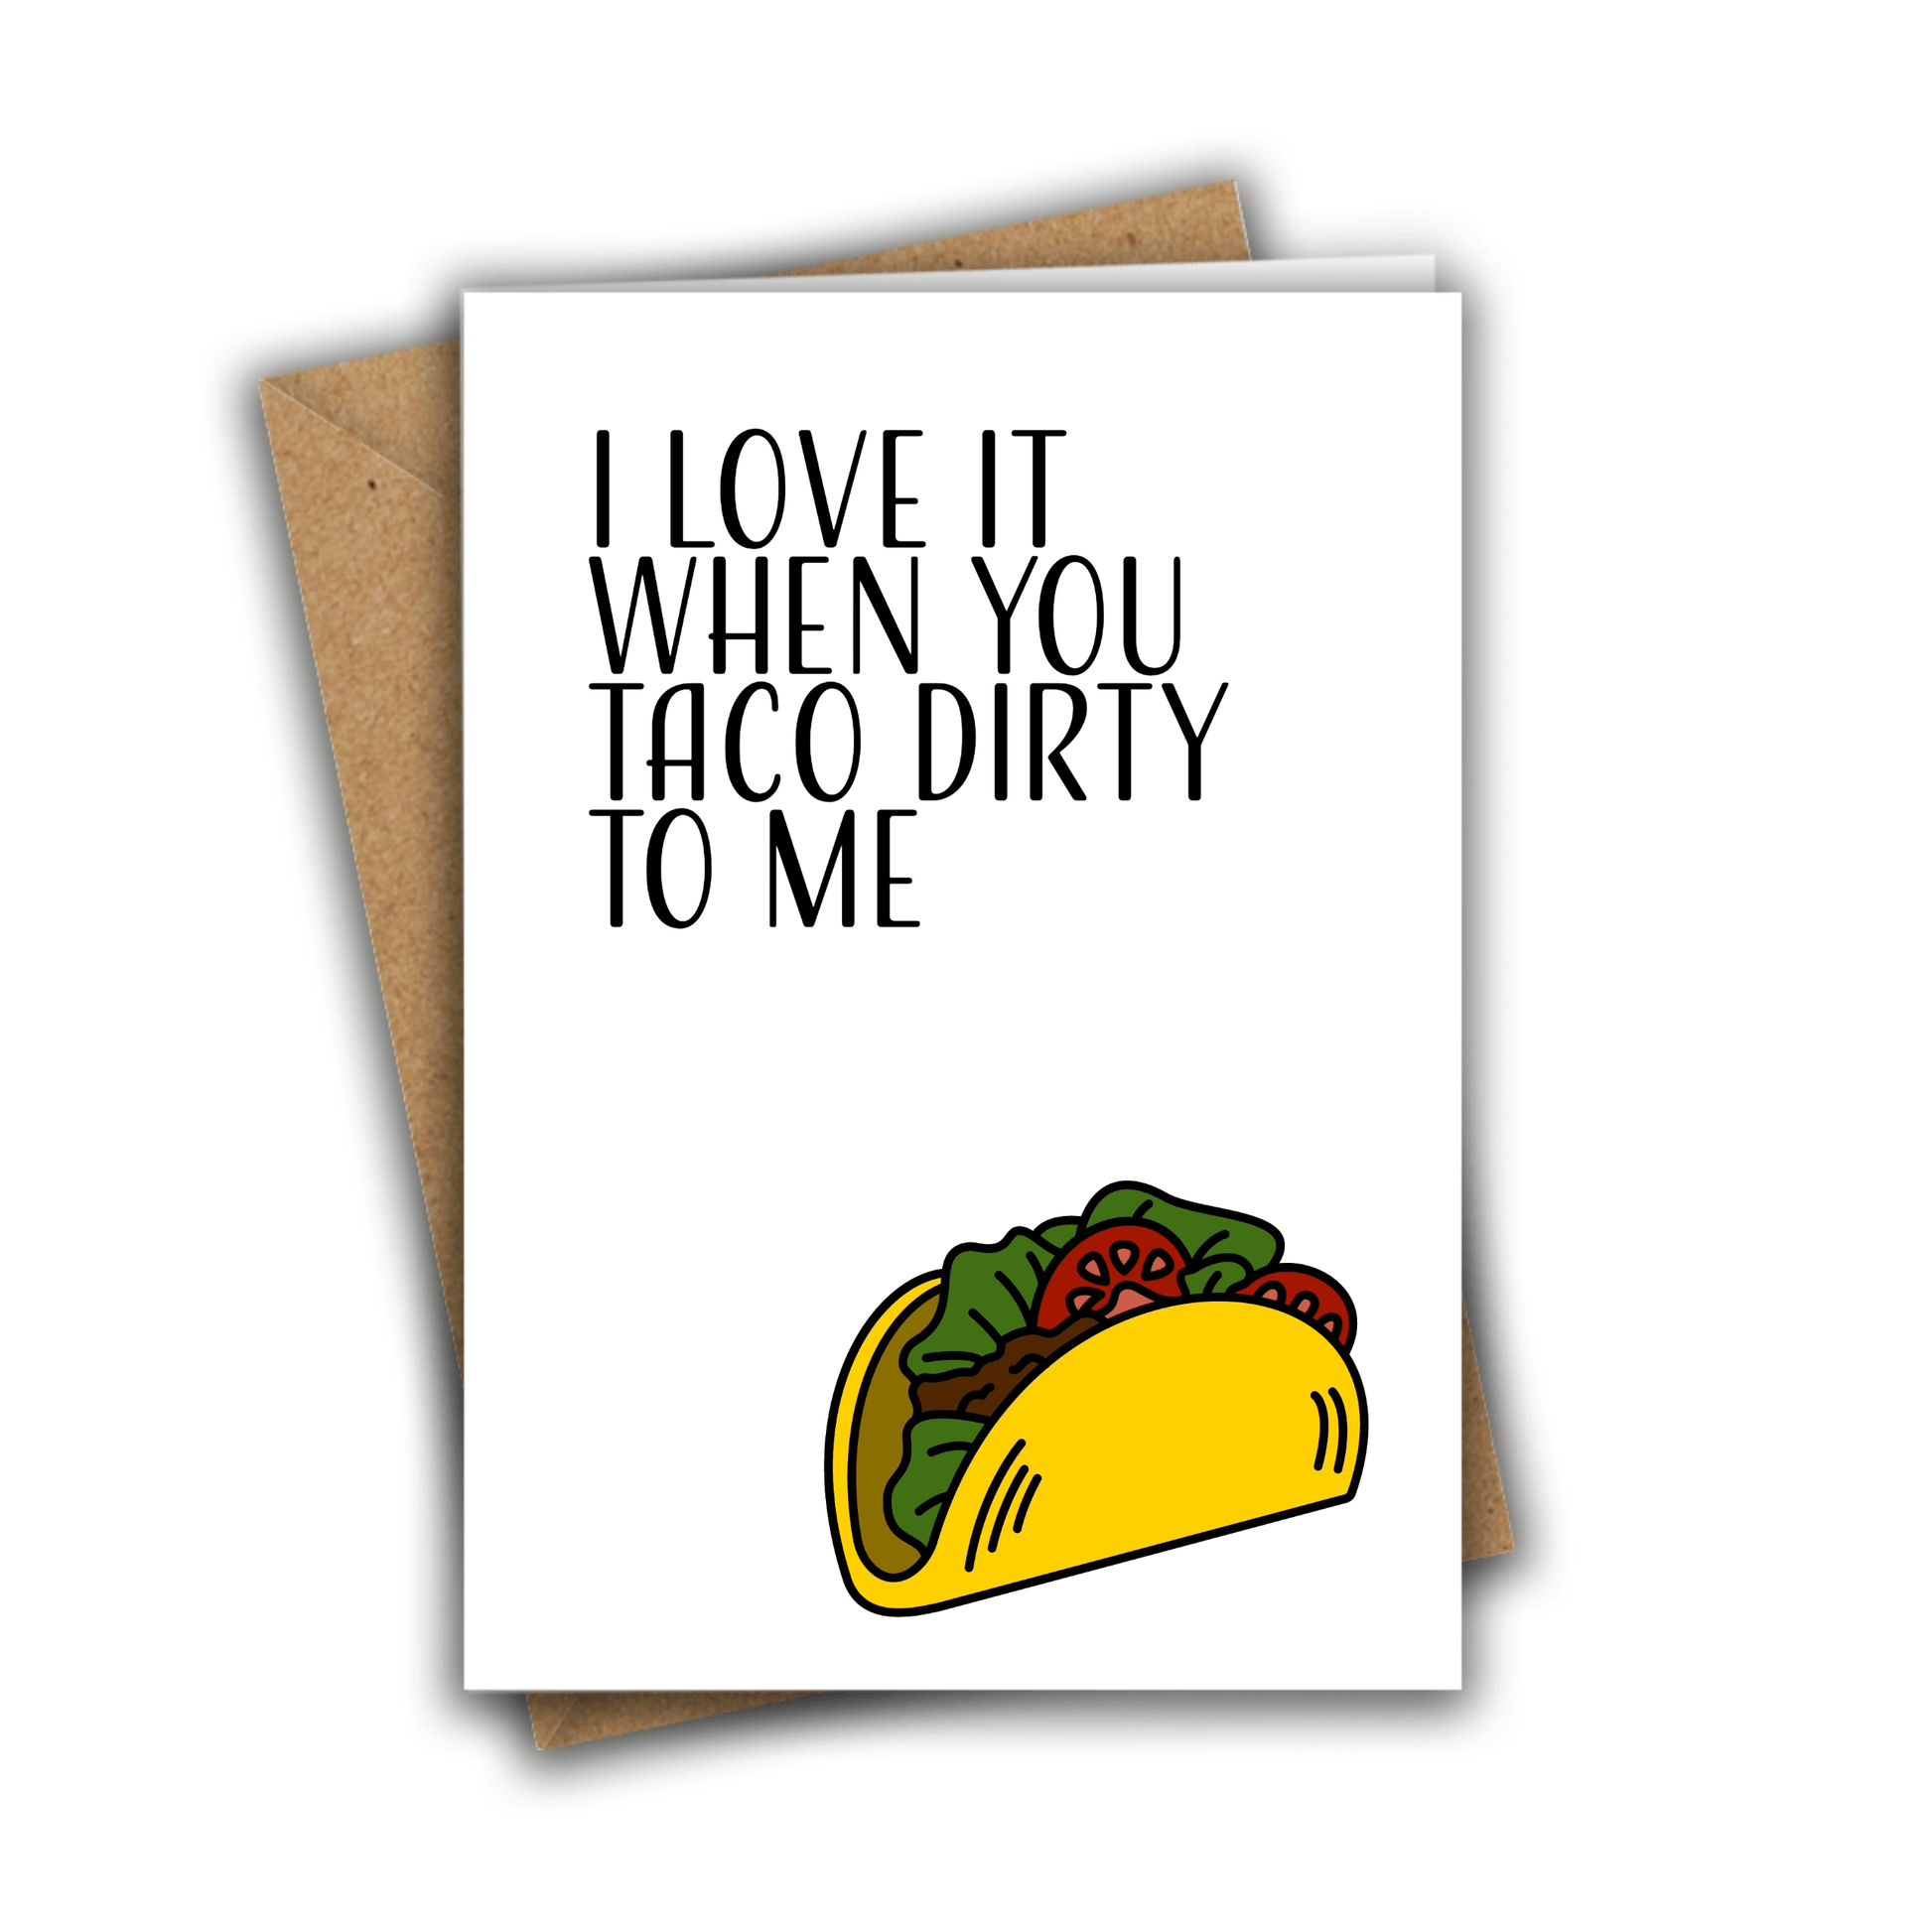 Little Kraken's You Taco Dirty to Me, Love Cards for £3.50 each